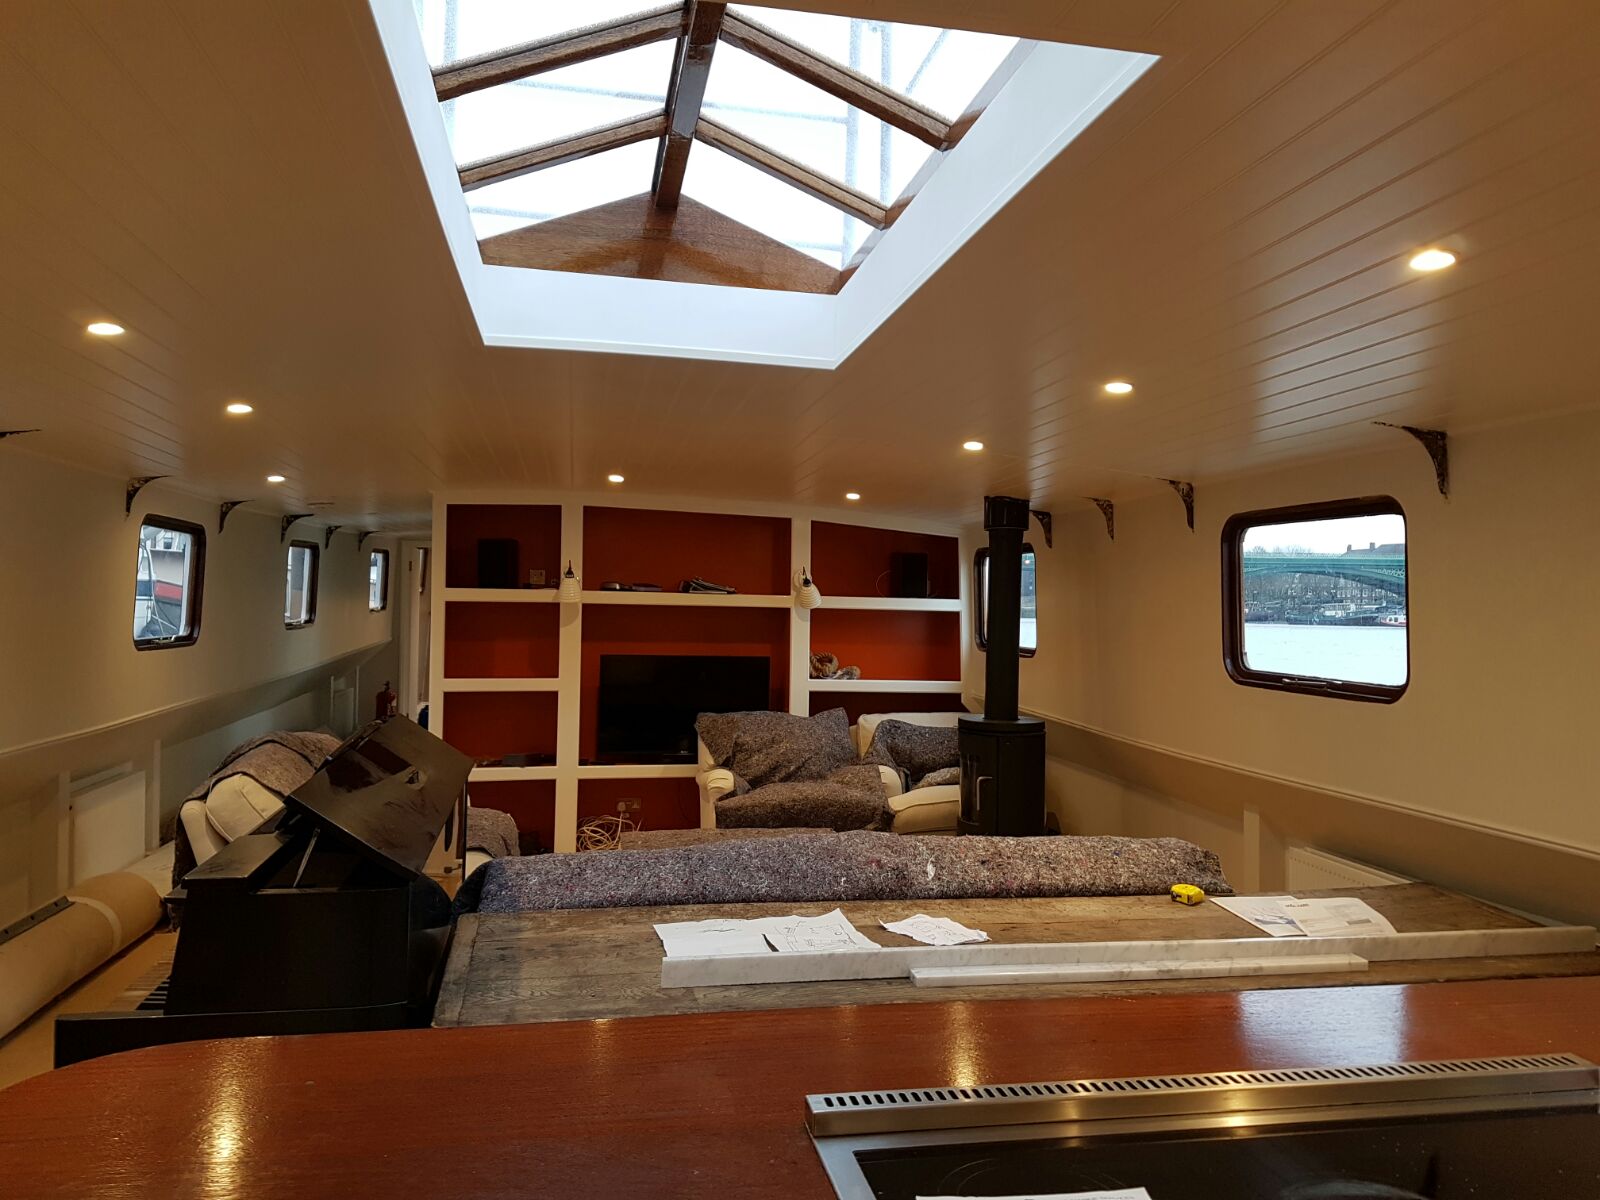 internal of canal boat after refurbishment